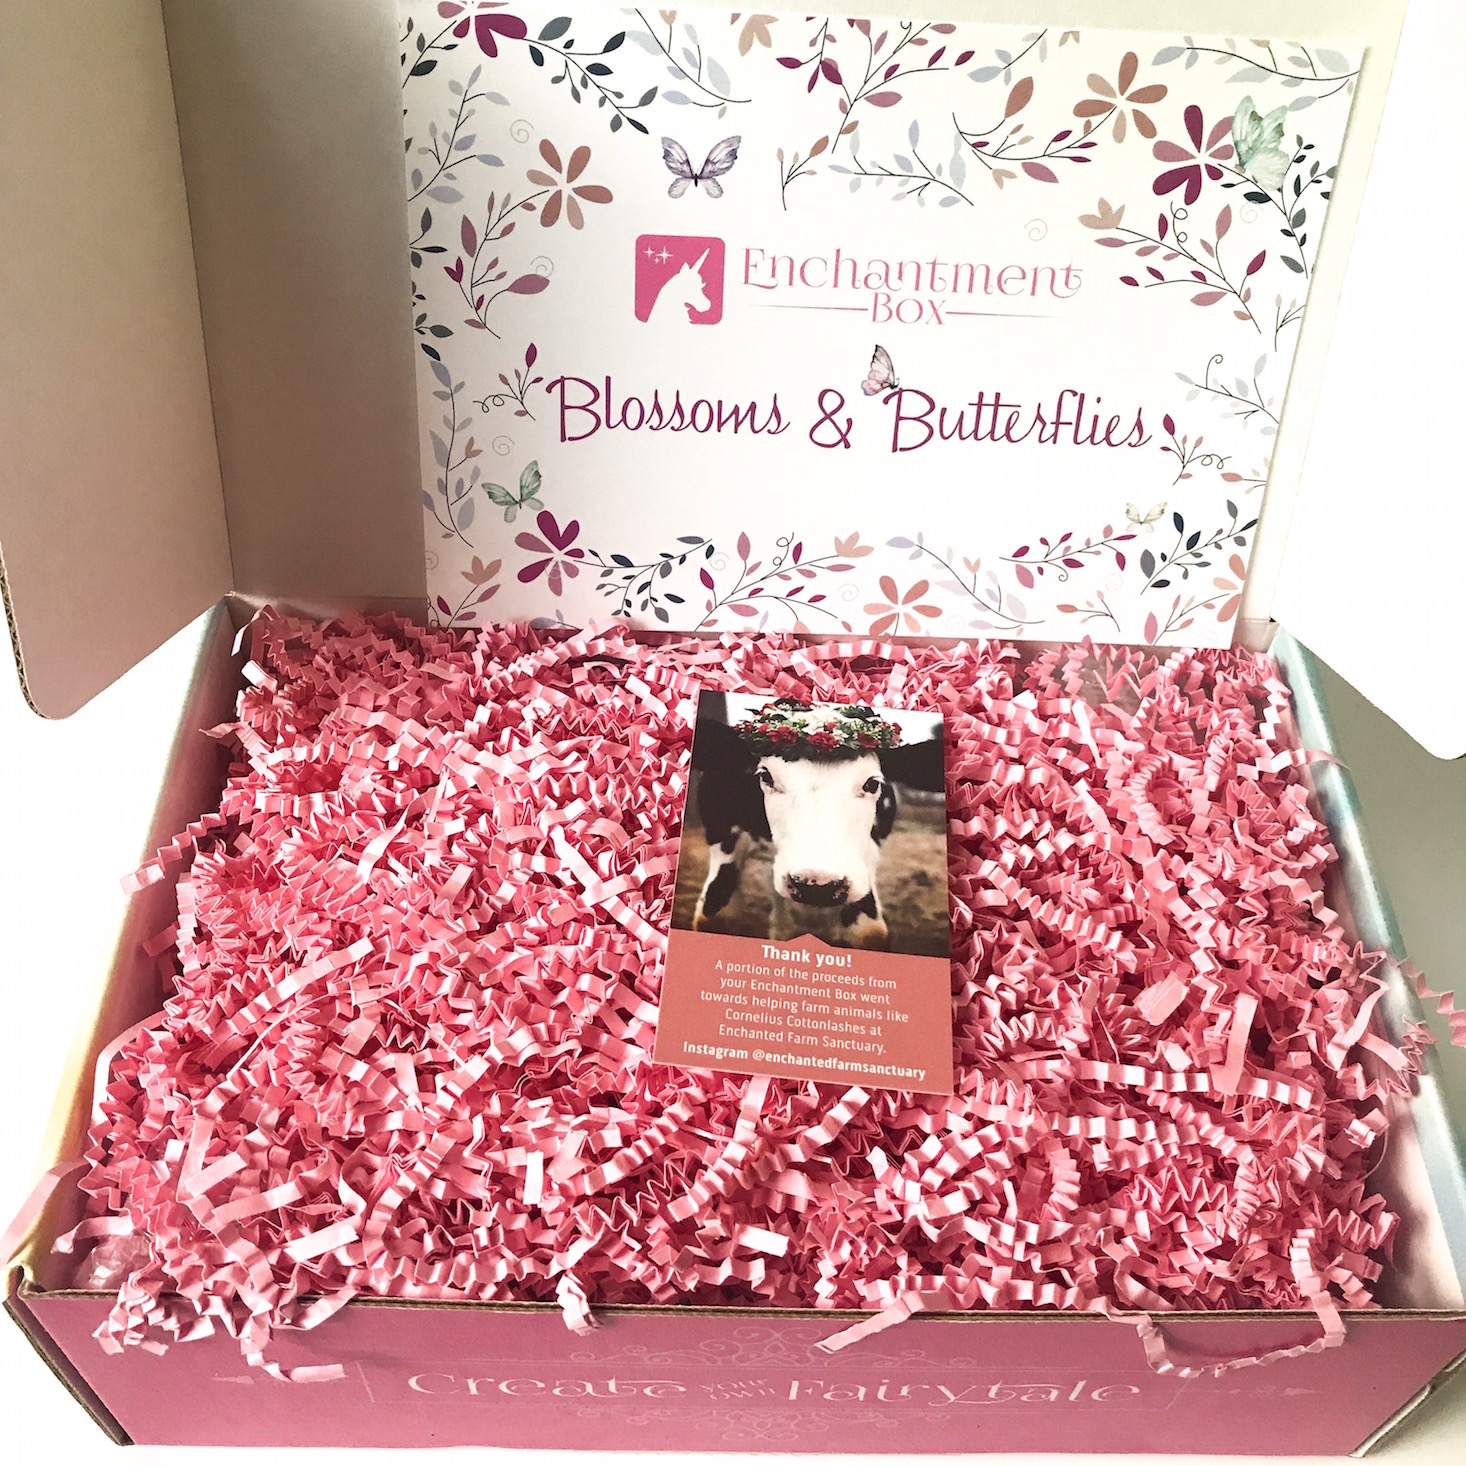 Enchantment Box “Blossoms and Butterflies” Review + Coupon – April 2018